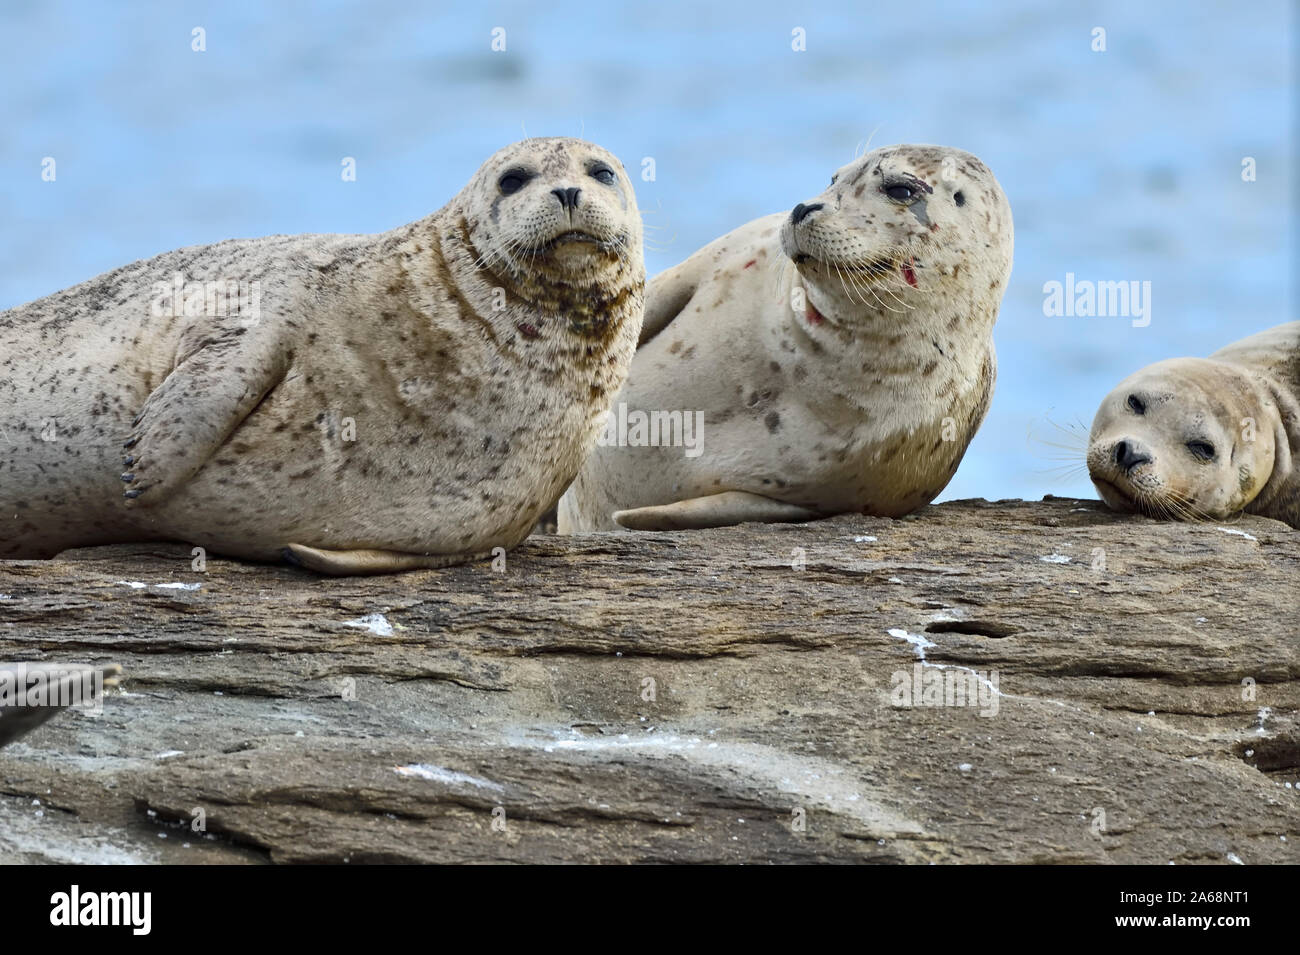 A herd of harbour seals (Phoca vitulina);  lay basking in the warm sunlight on a rocky island beach near Vancouver Island British Columbia Canada Stock Photo